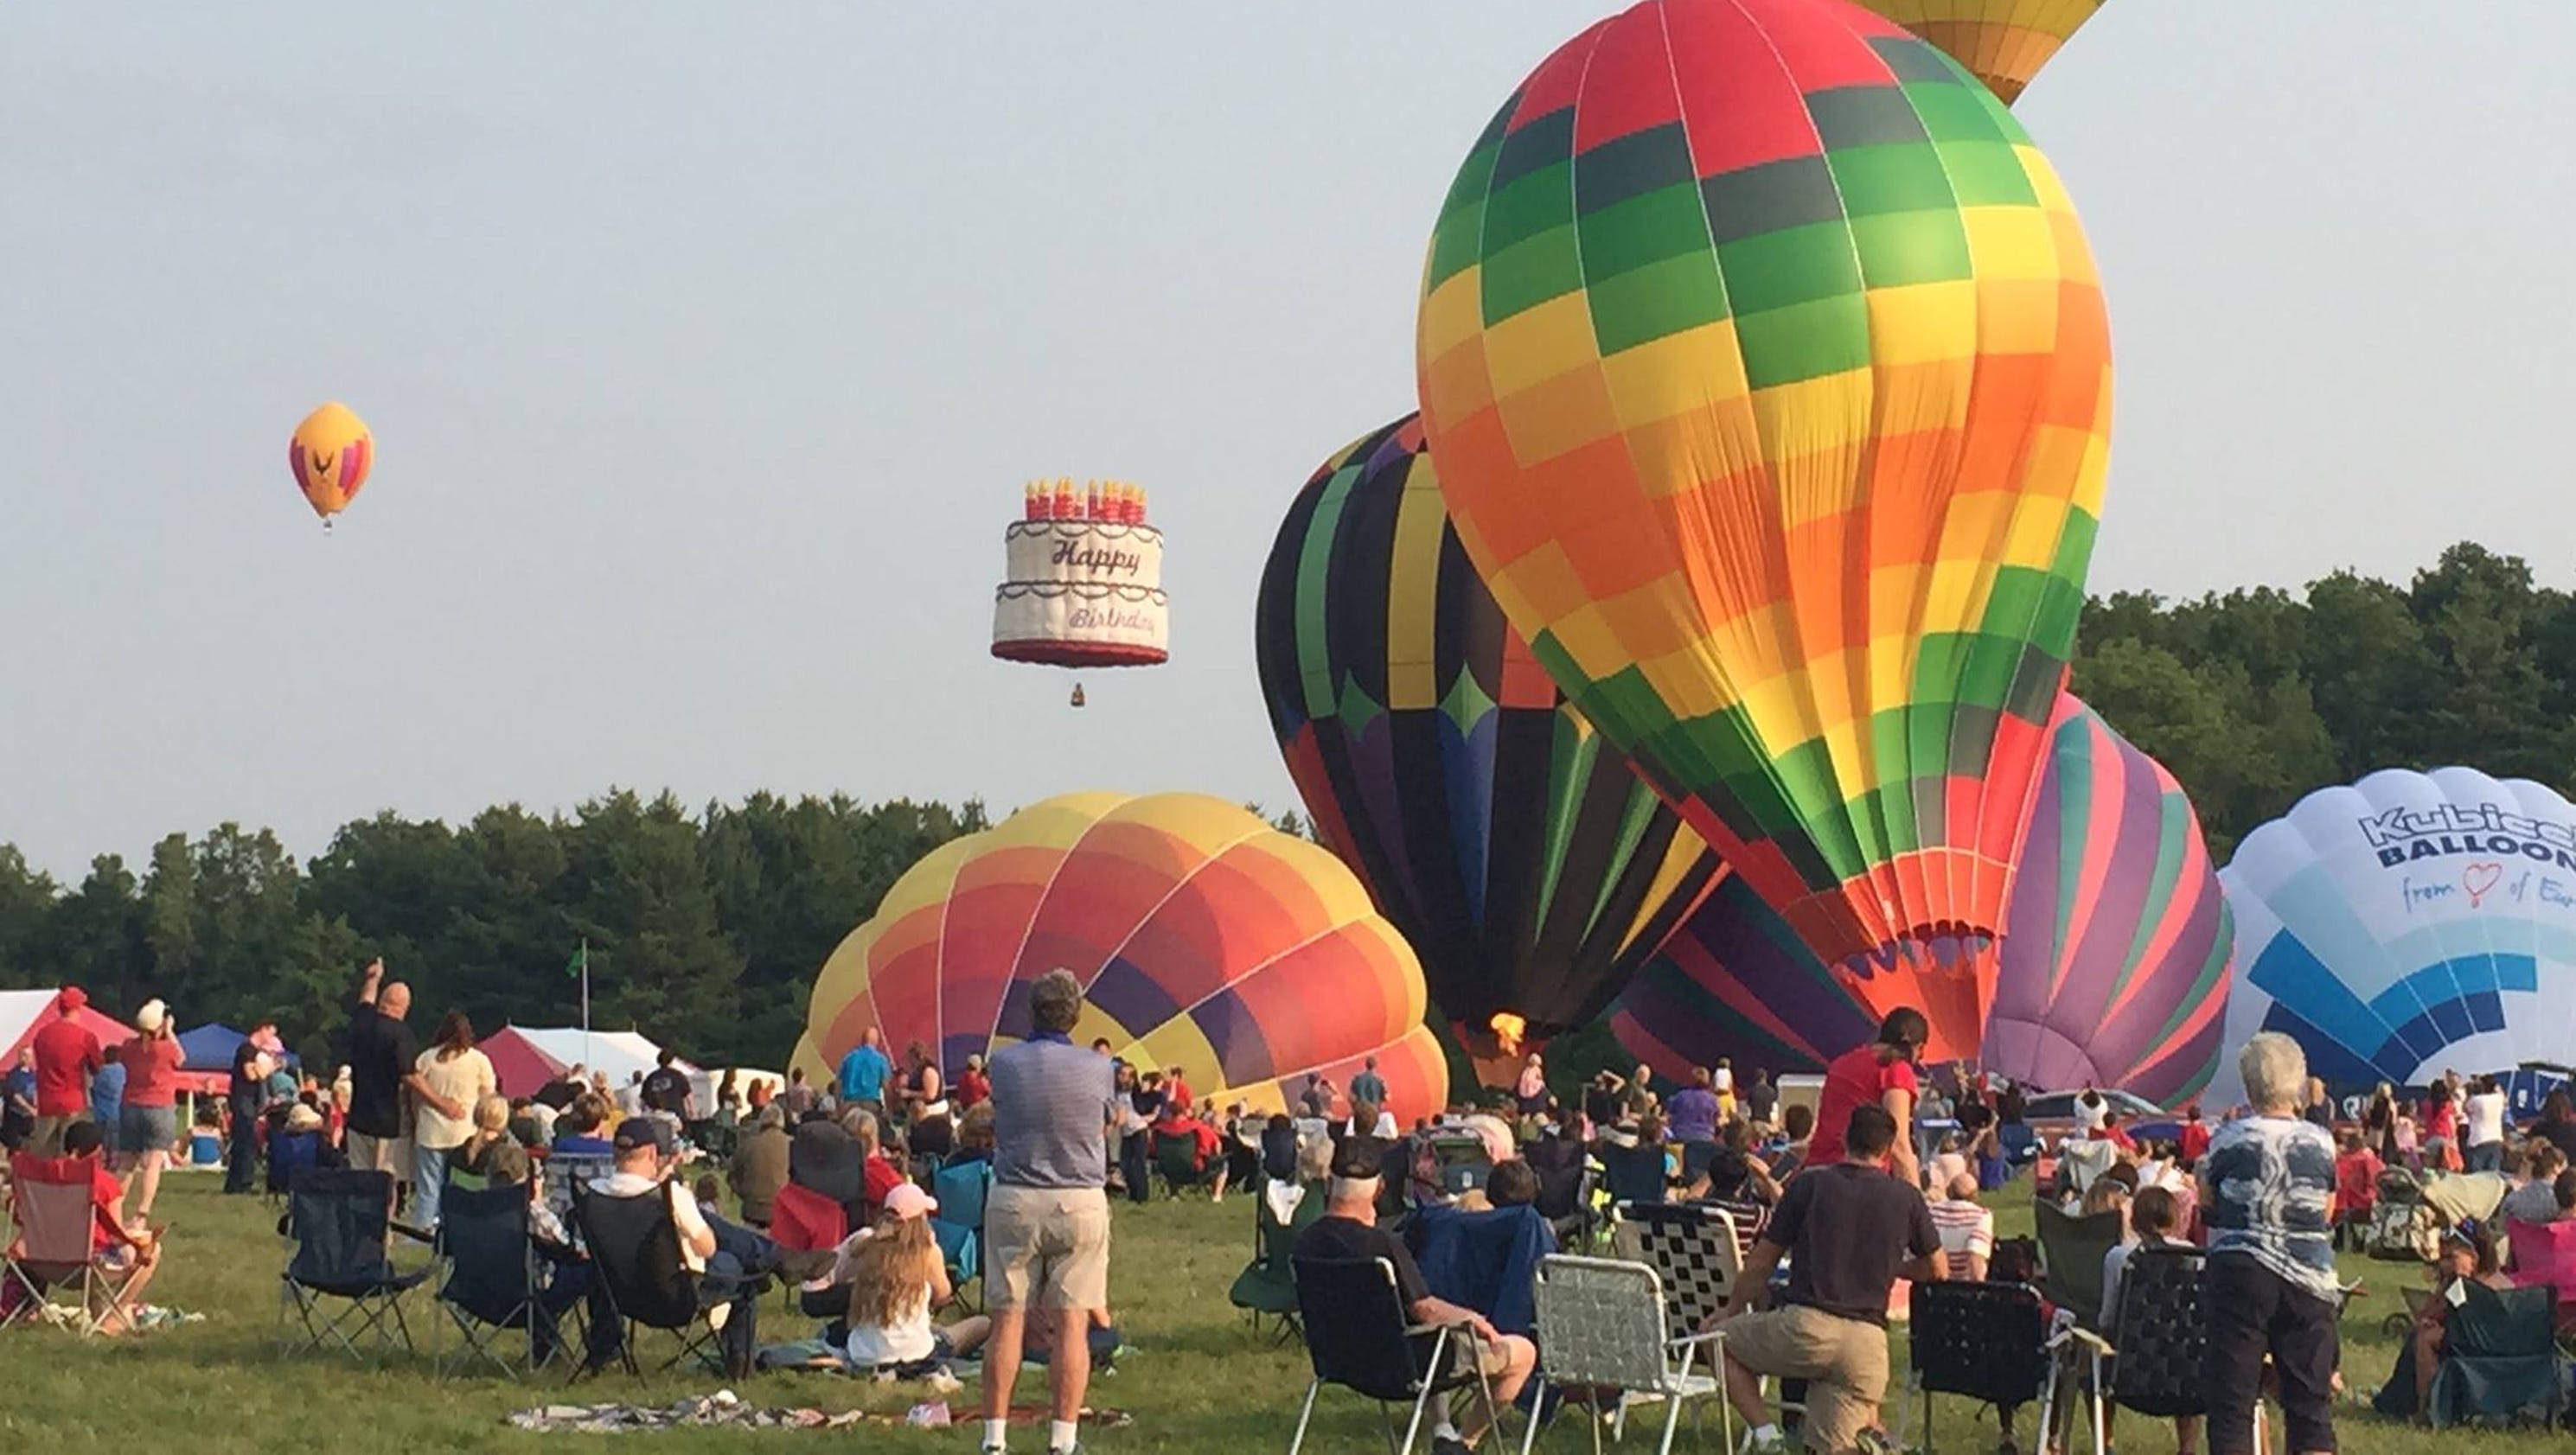 BalloonFest floating into Ashland for 28th year